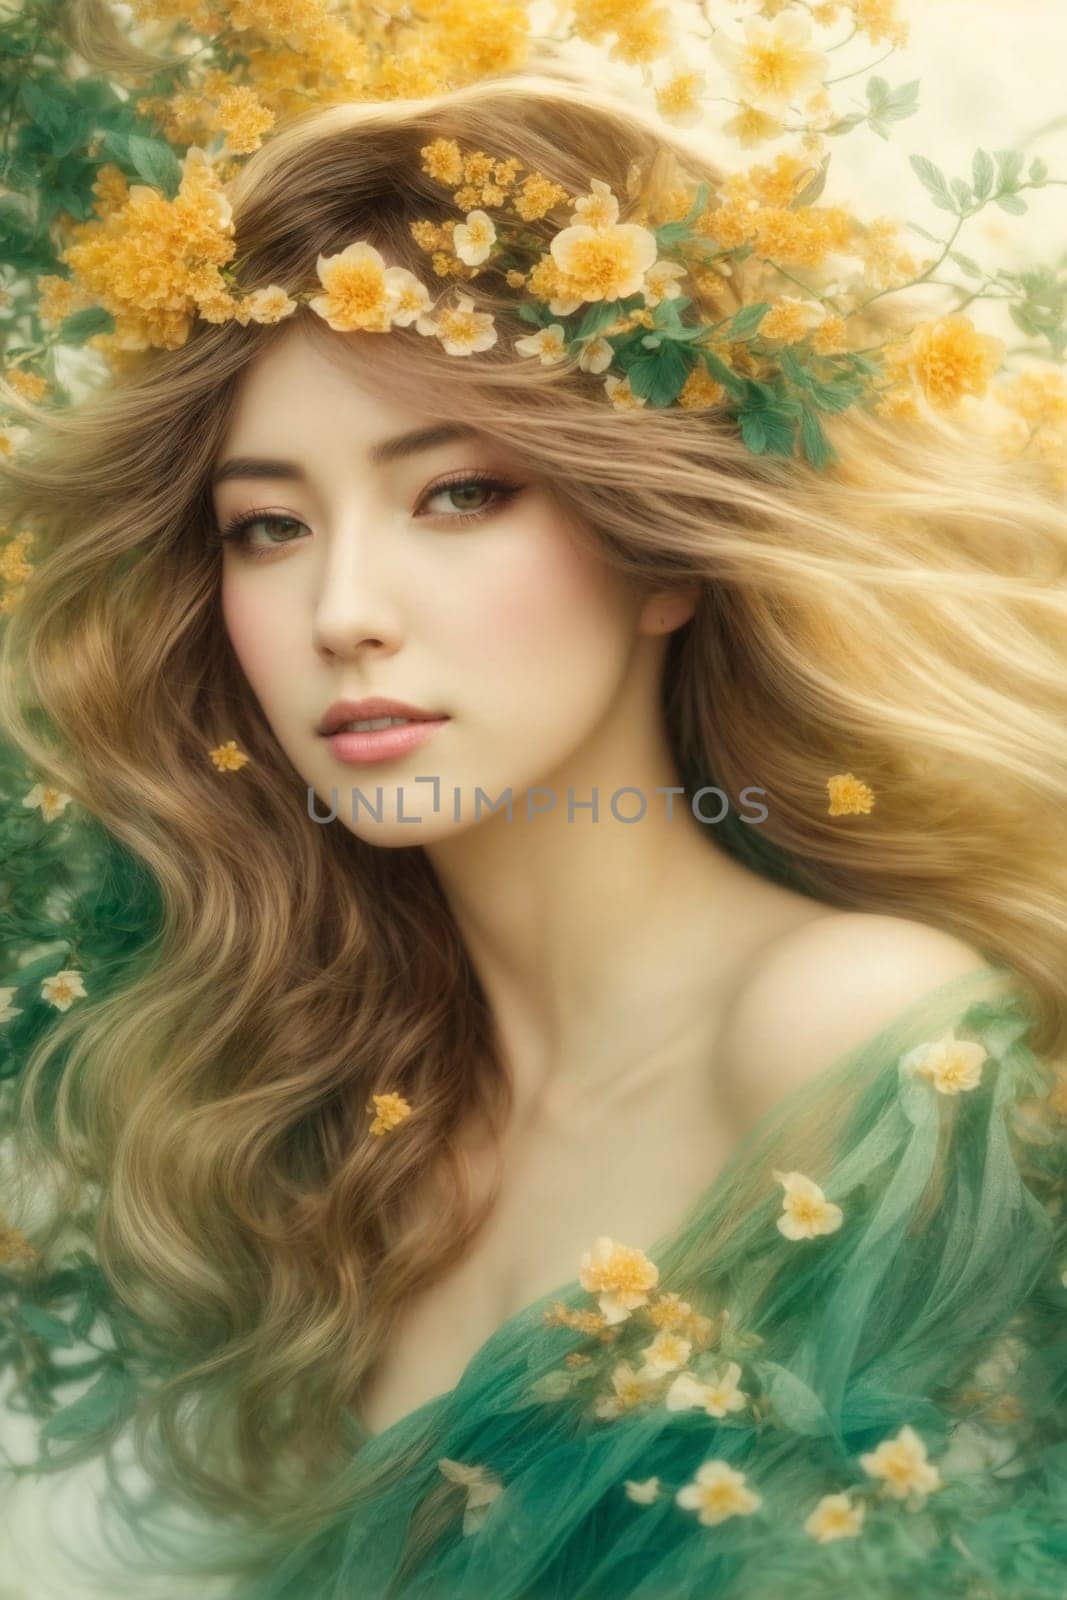 A striking, vibrant artwork featuring a woman adorned with flowers in her hair, showcasing beauty and expression.